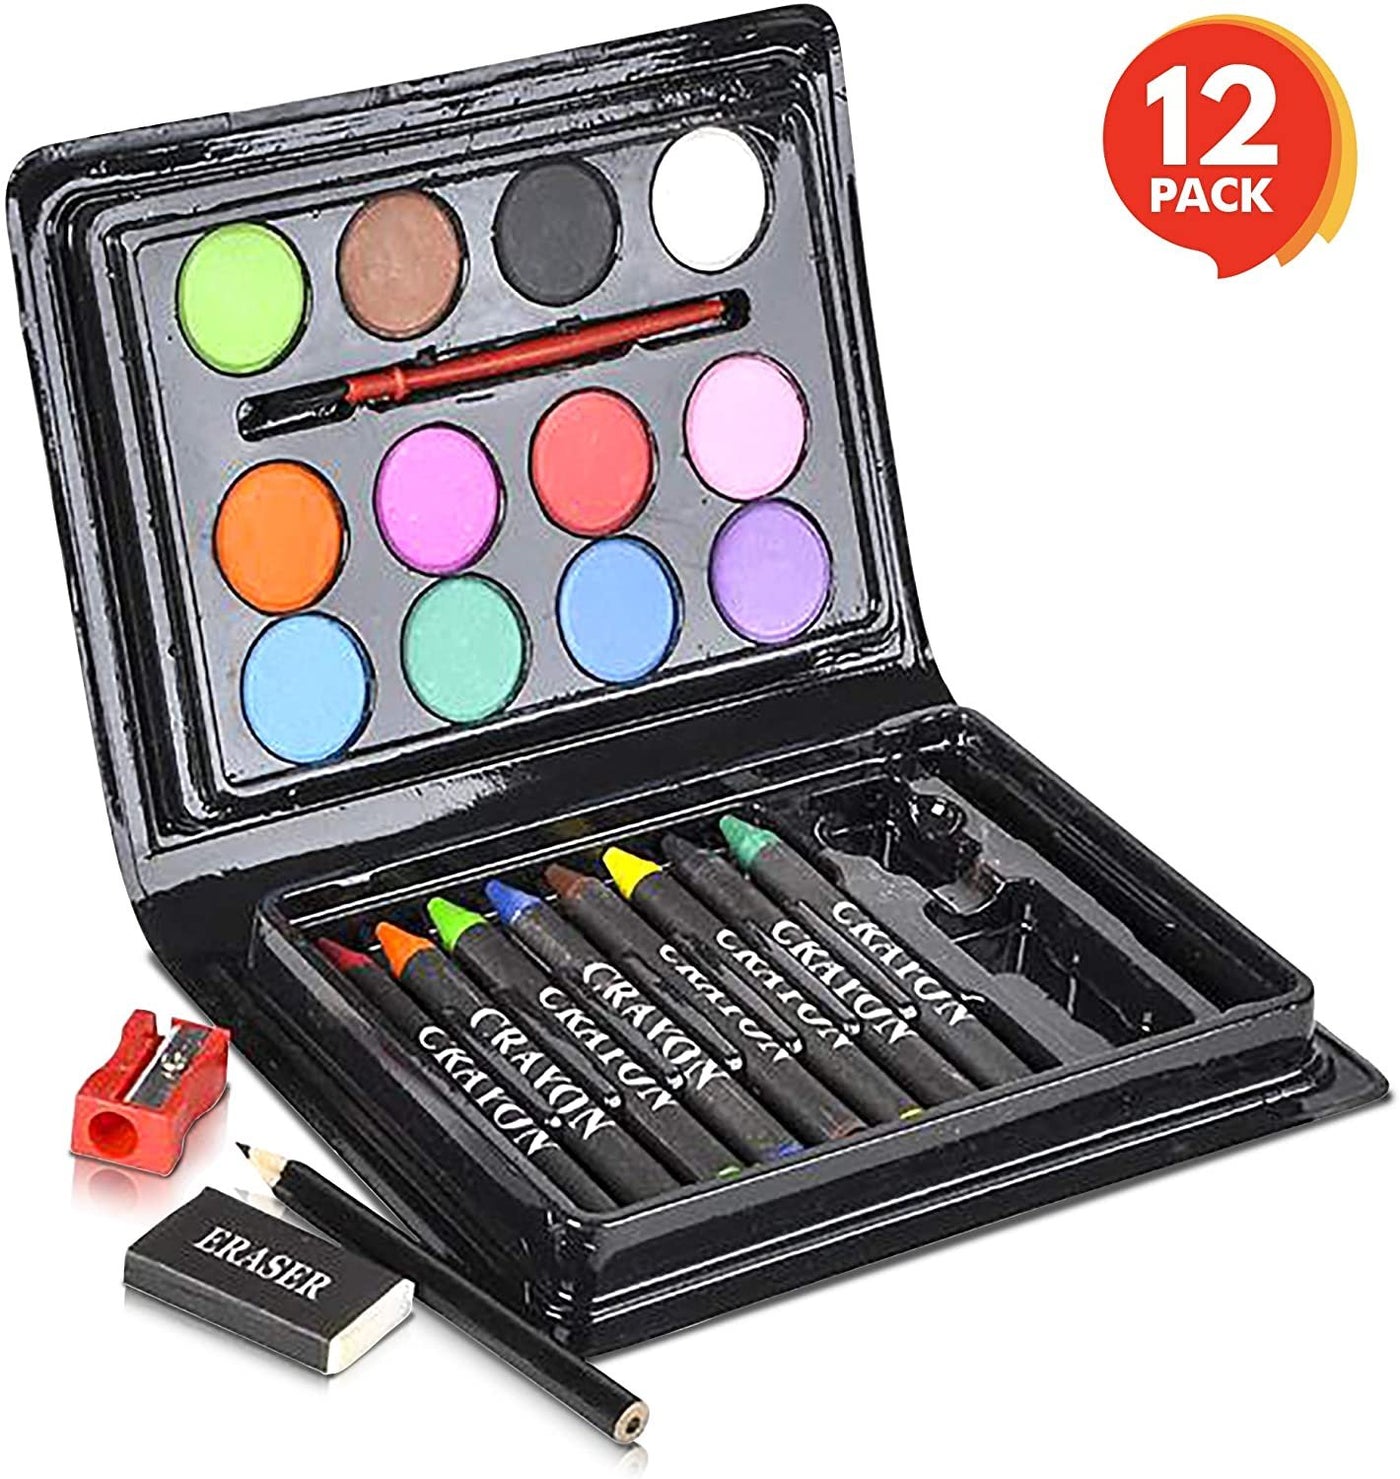 13 New Unique Art Sets & Art Supplies Available To Buy Online